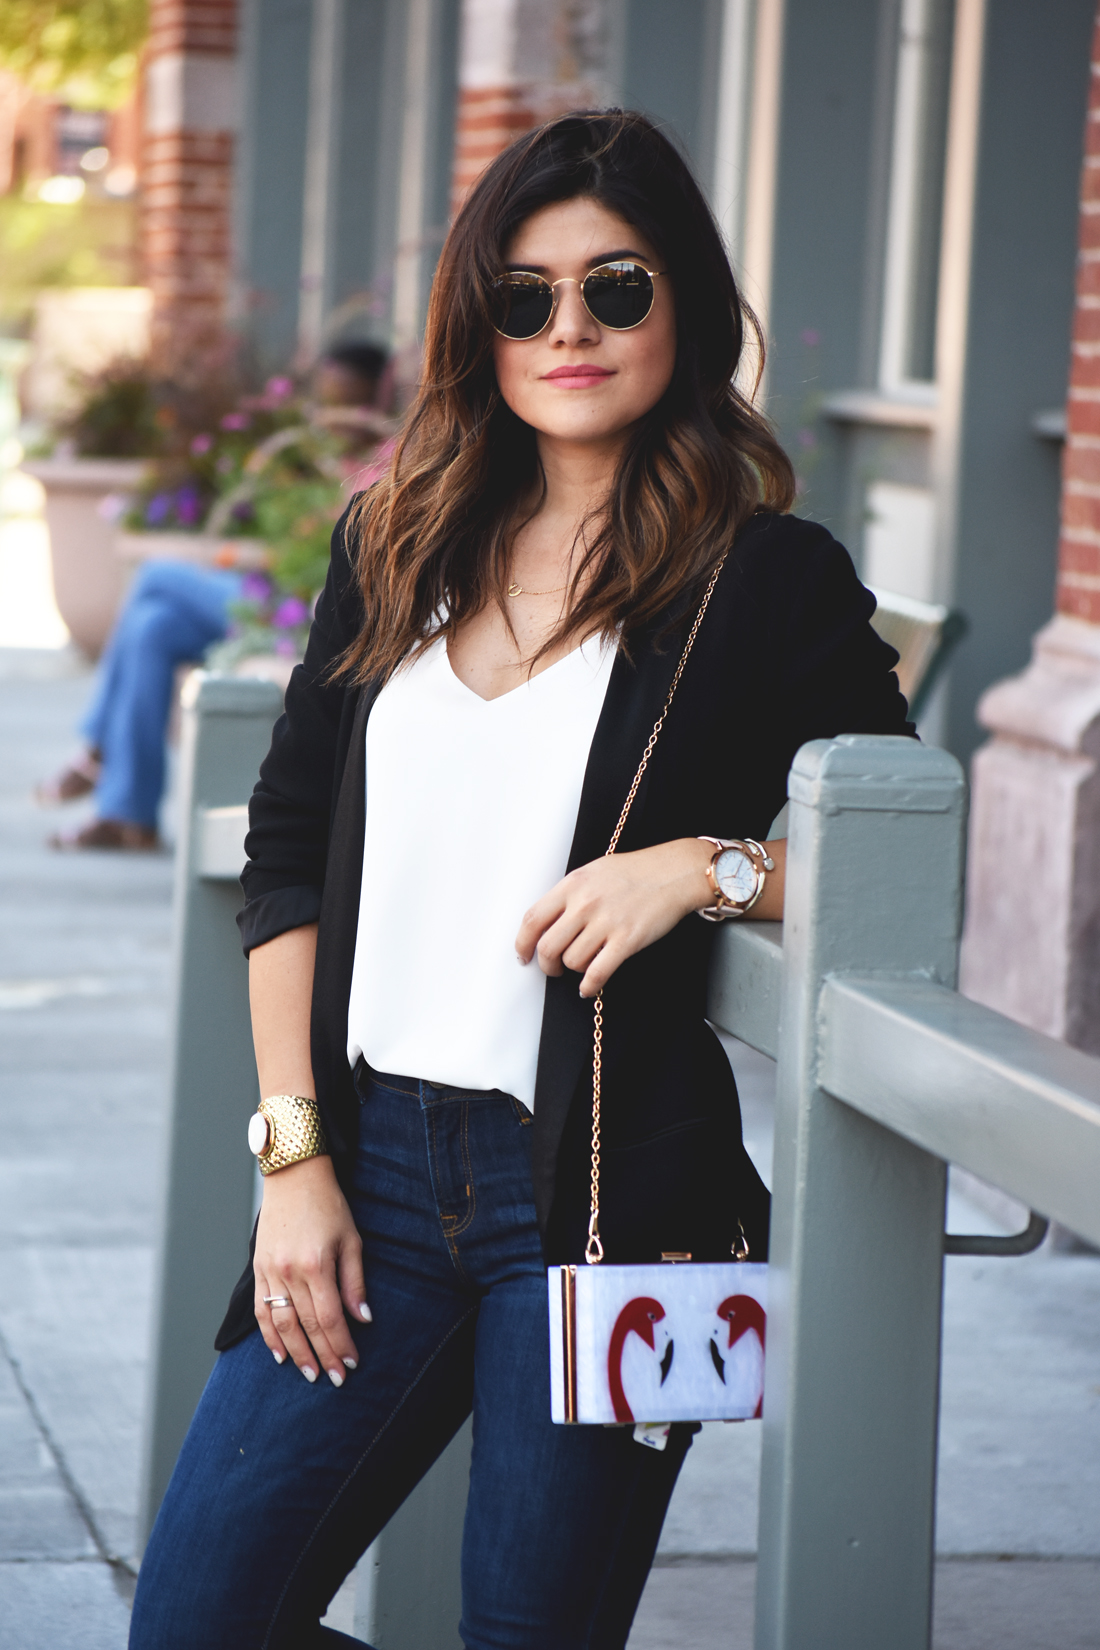 Carolina Hellal of Chic Talk wearing Rayban Rounded sunglasses, an H&M black blazer, a white Topshop top, and Old Navy jeans. - MY GO-TO CASUAL OUTFIT by popular Denver fashion blogger Chic Talk